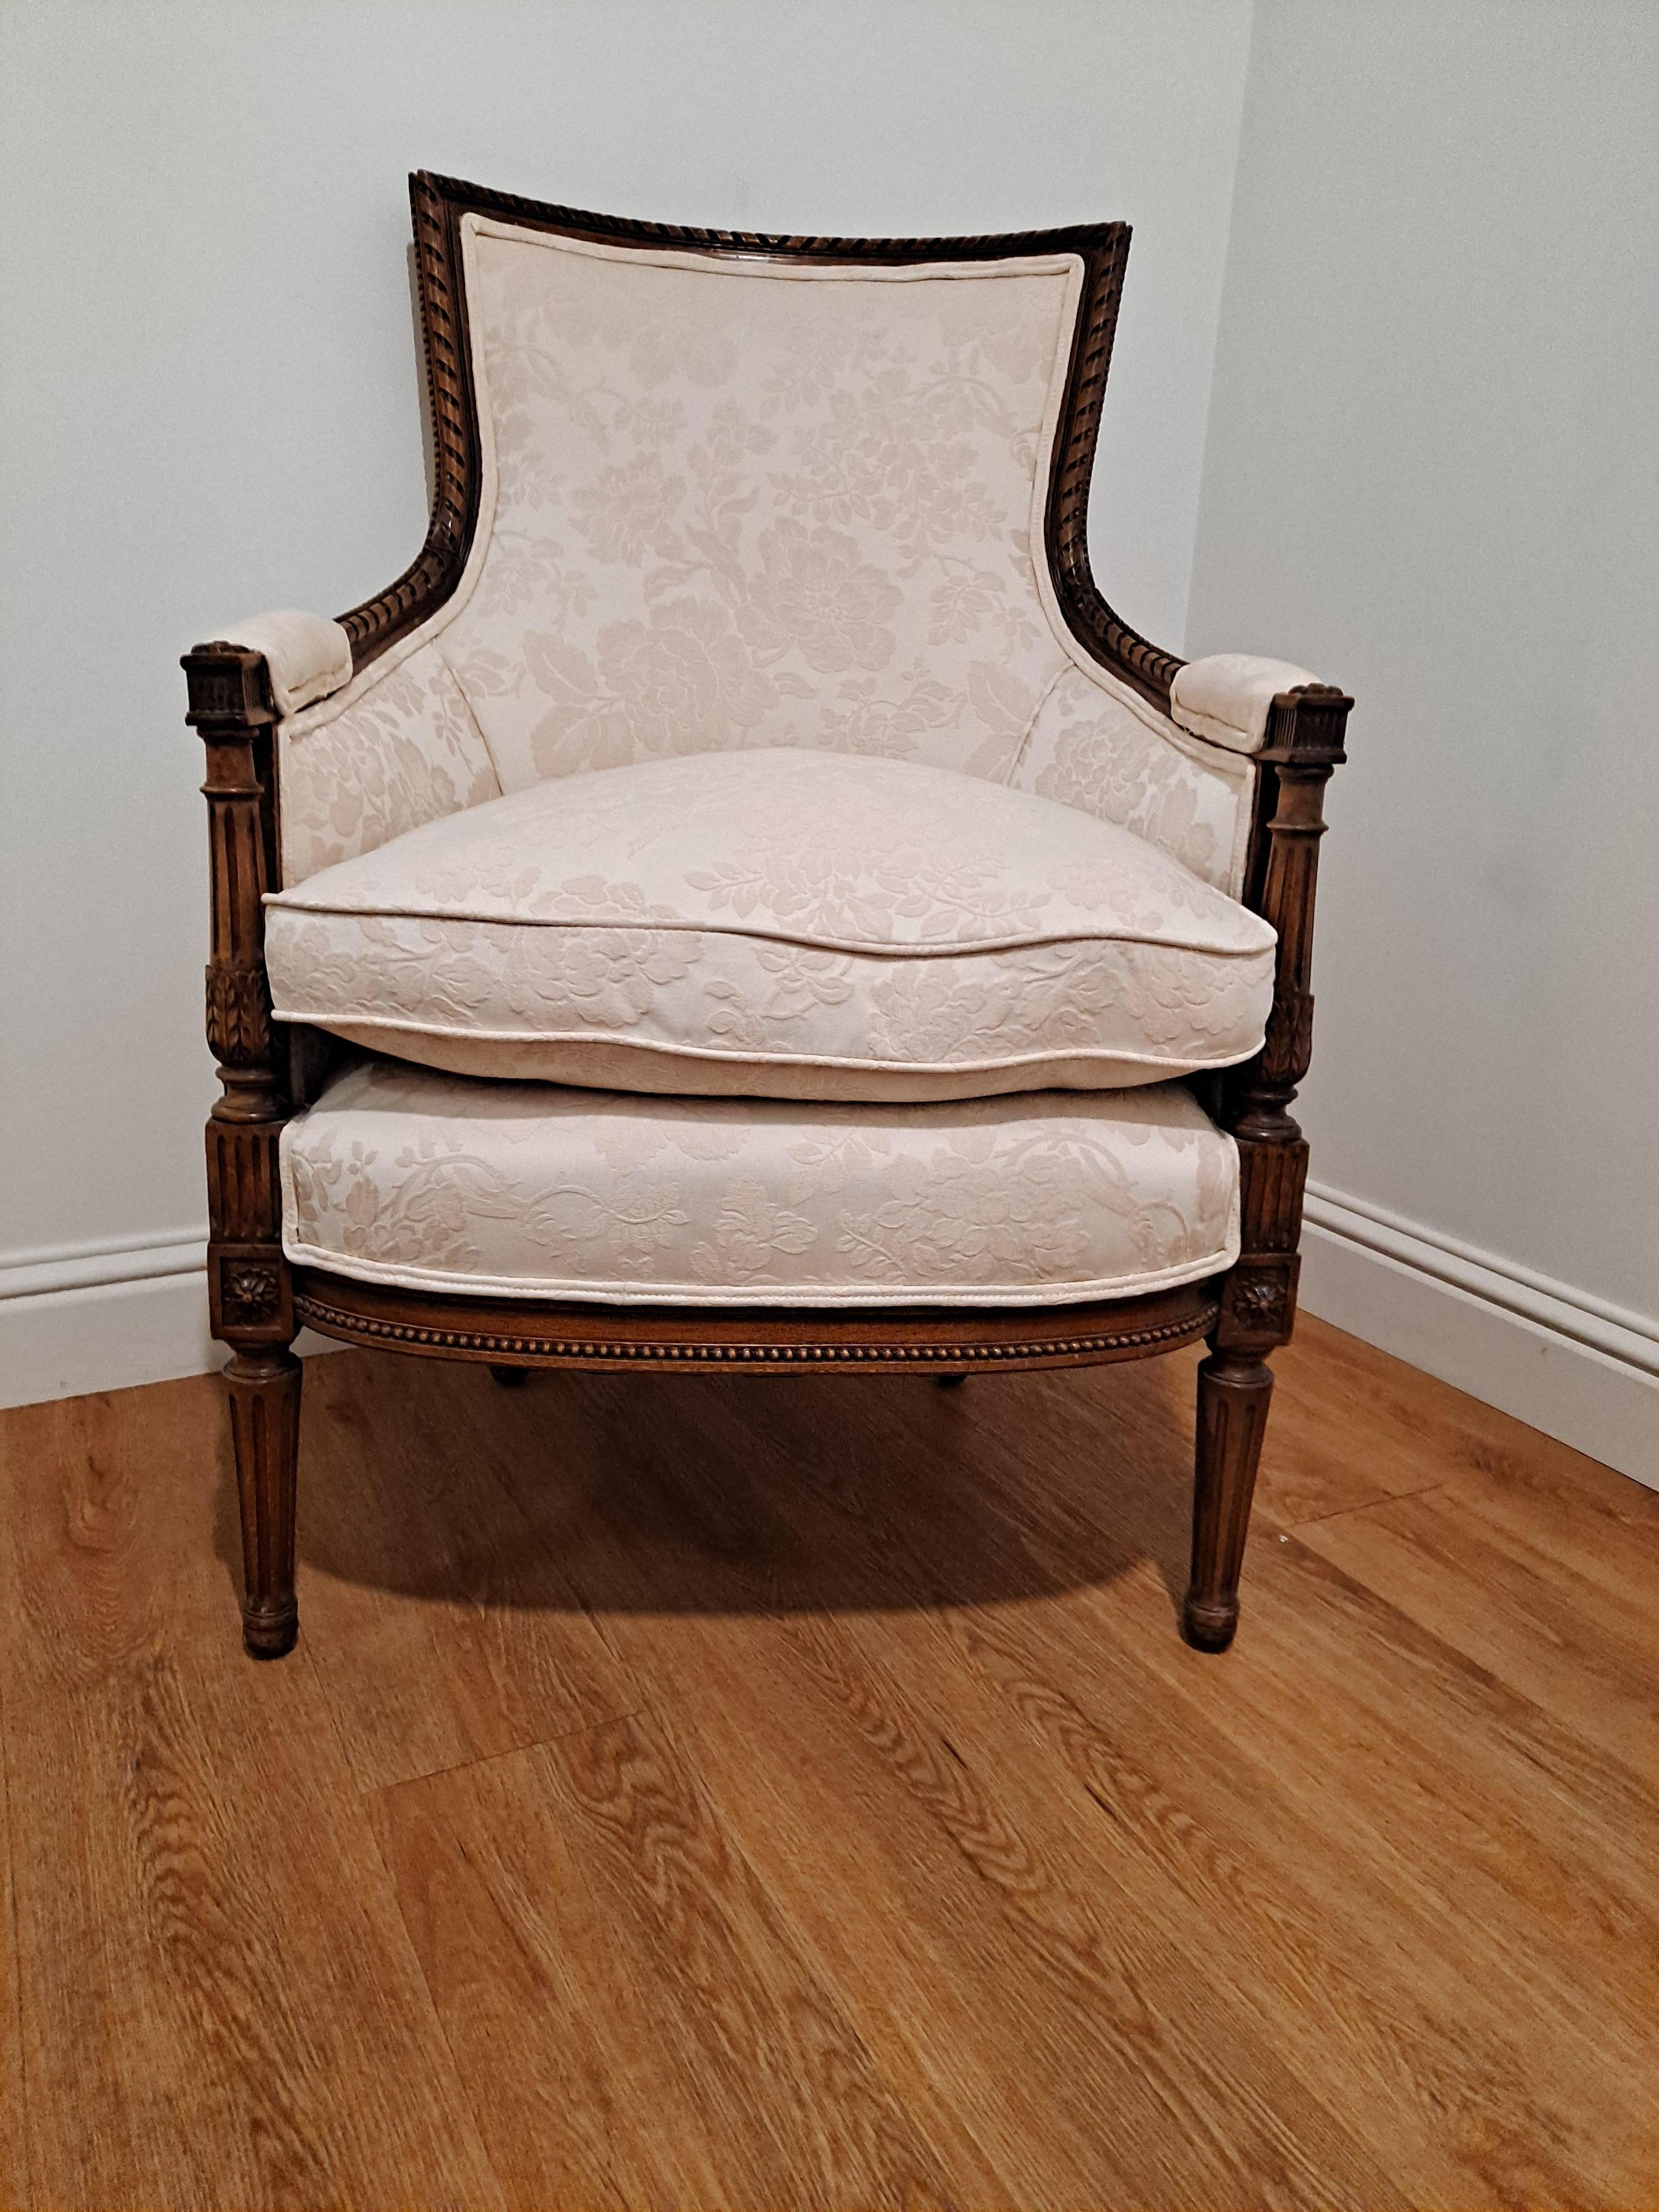 Louis XVI Style Finely Curved Walnut Bergere/Tub Chair

Beautifully upholstered with cushion seat

26